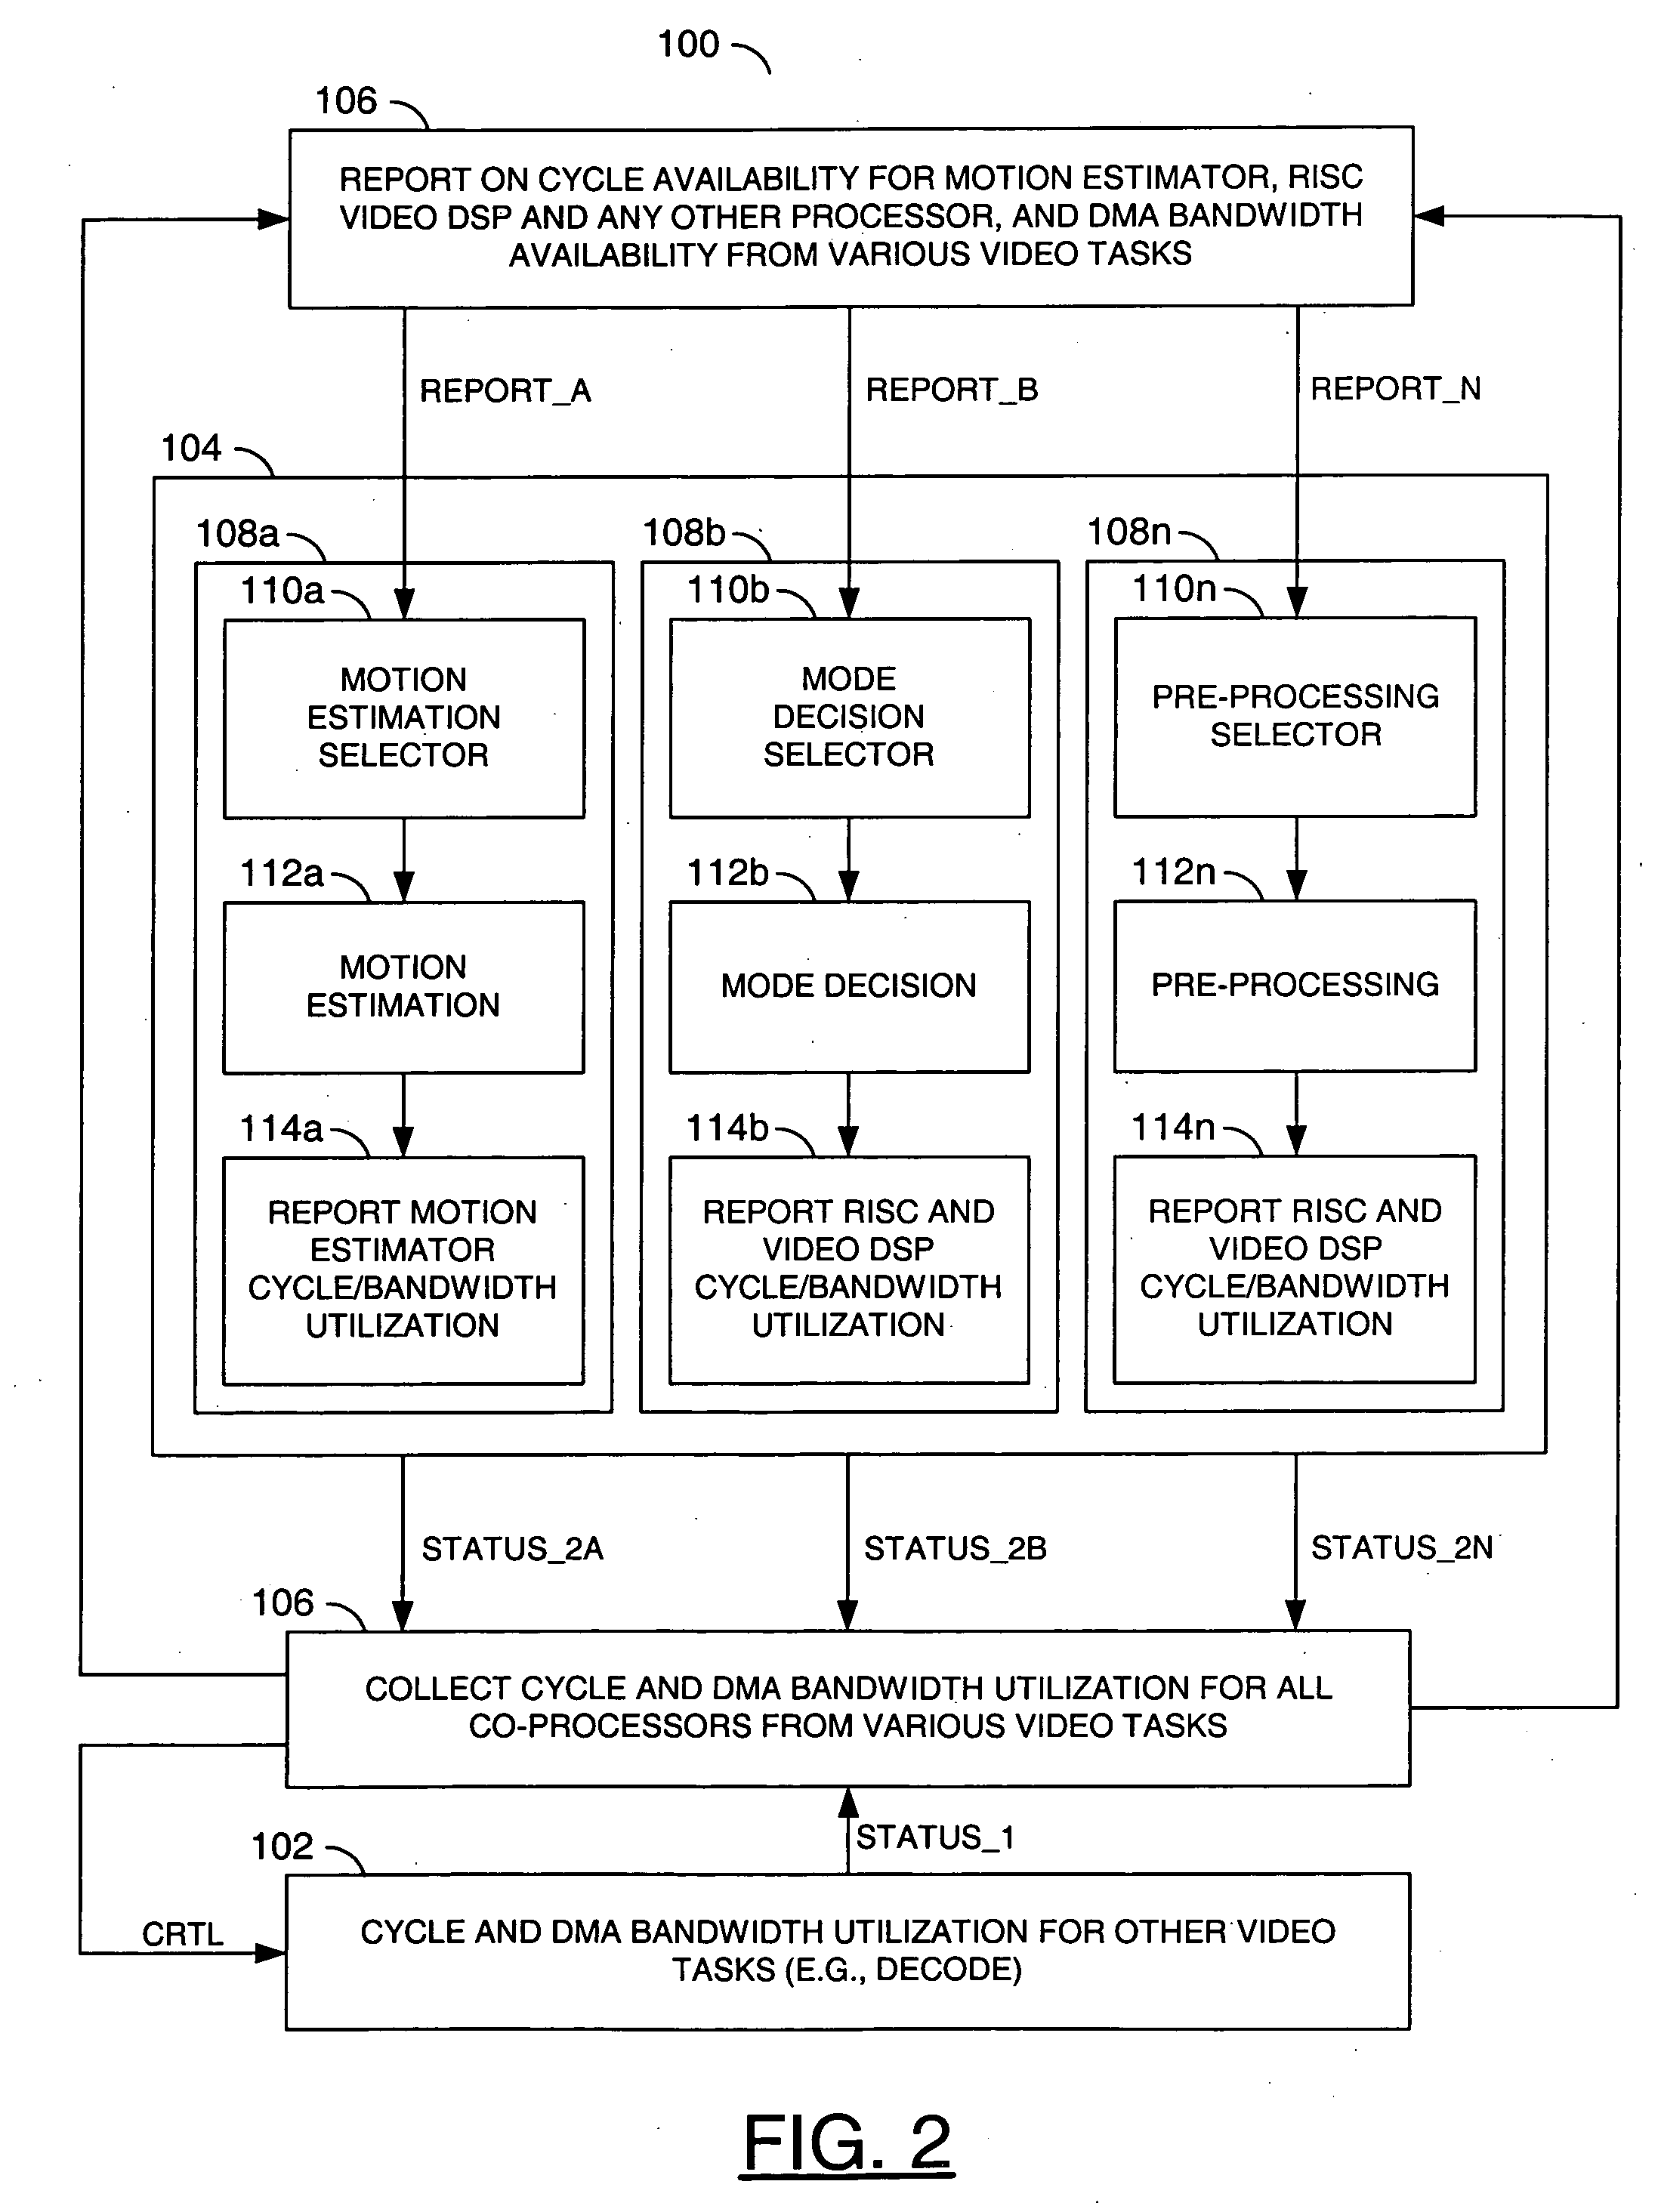 Performance adaptive video encoding with concurrent decoding